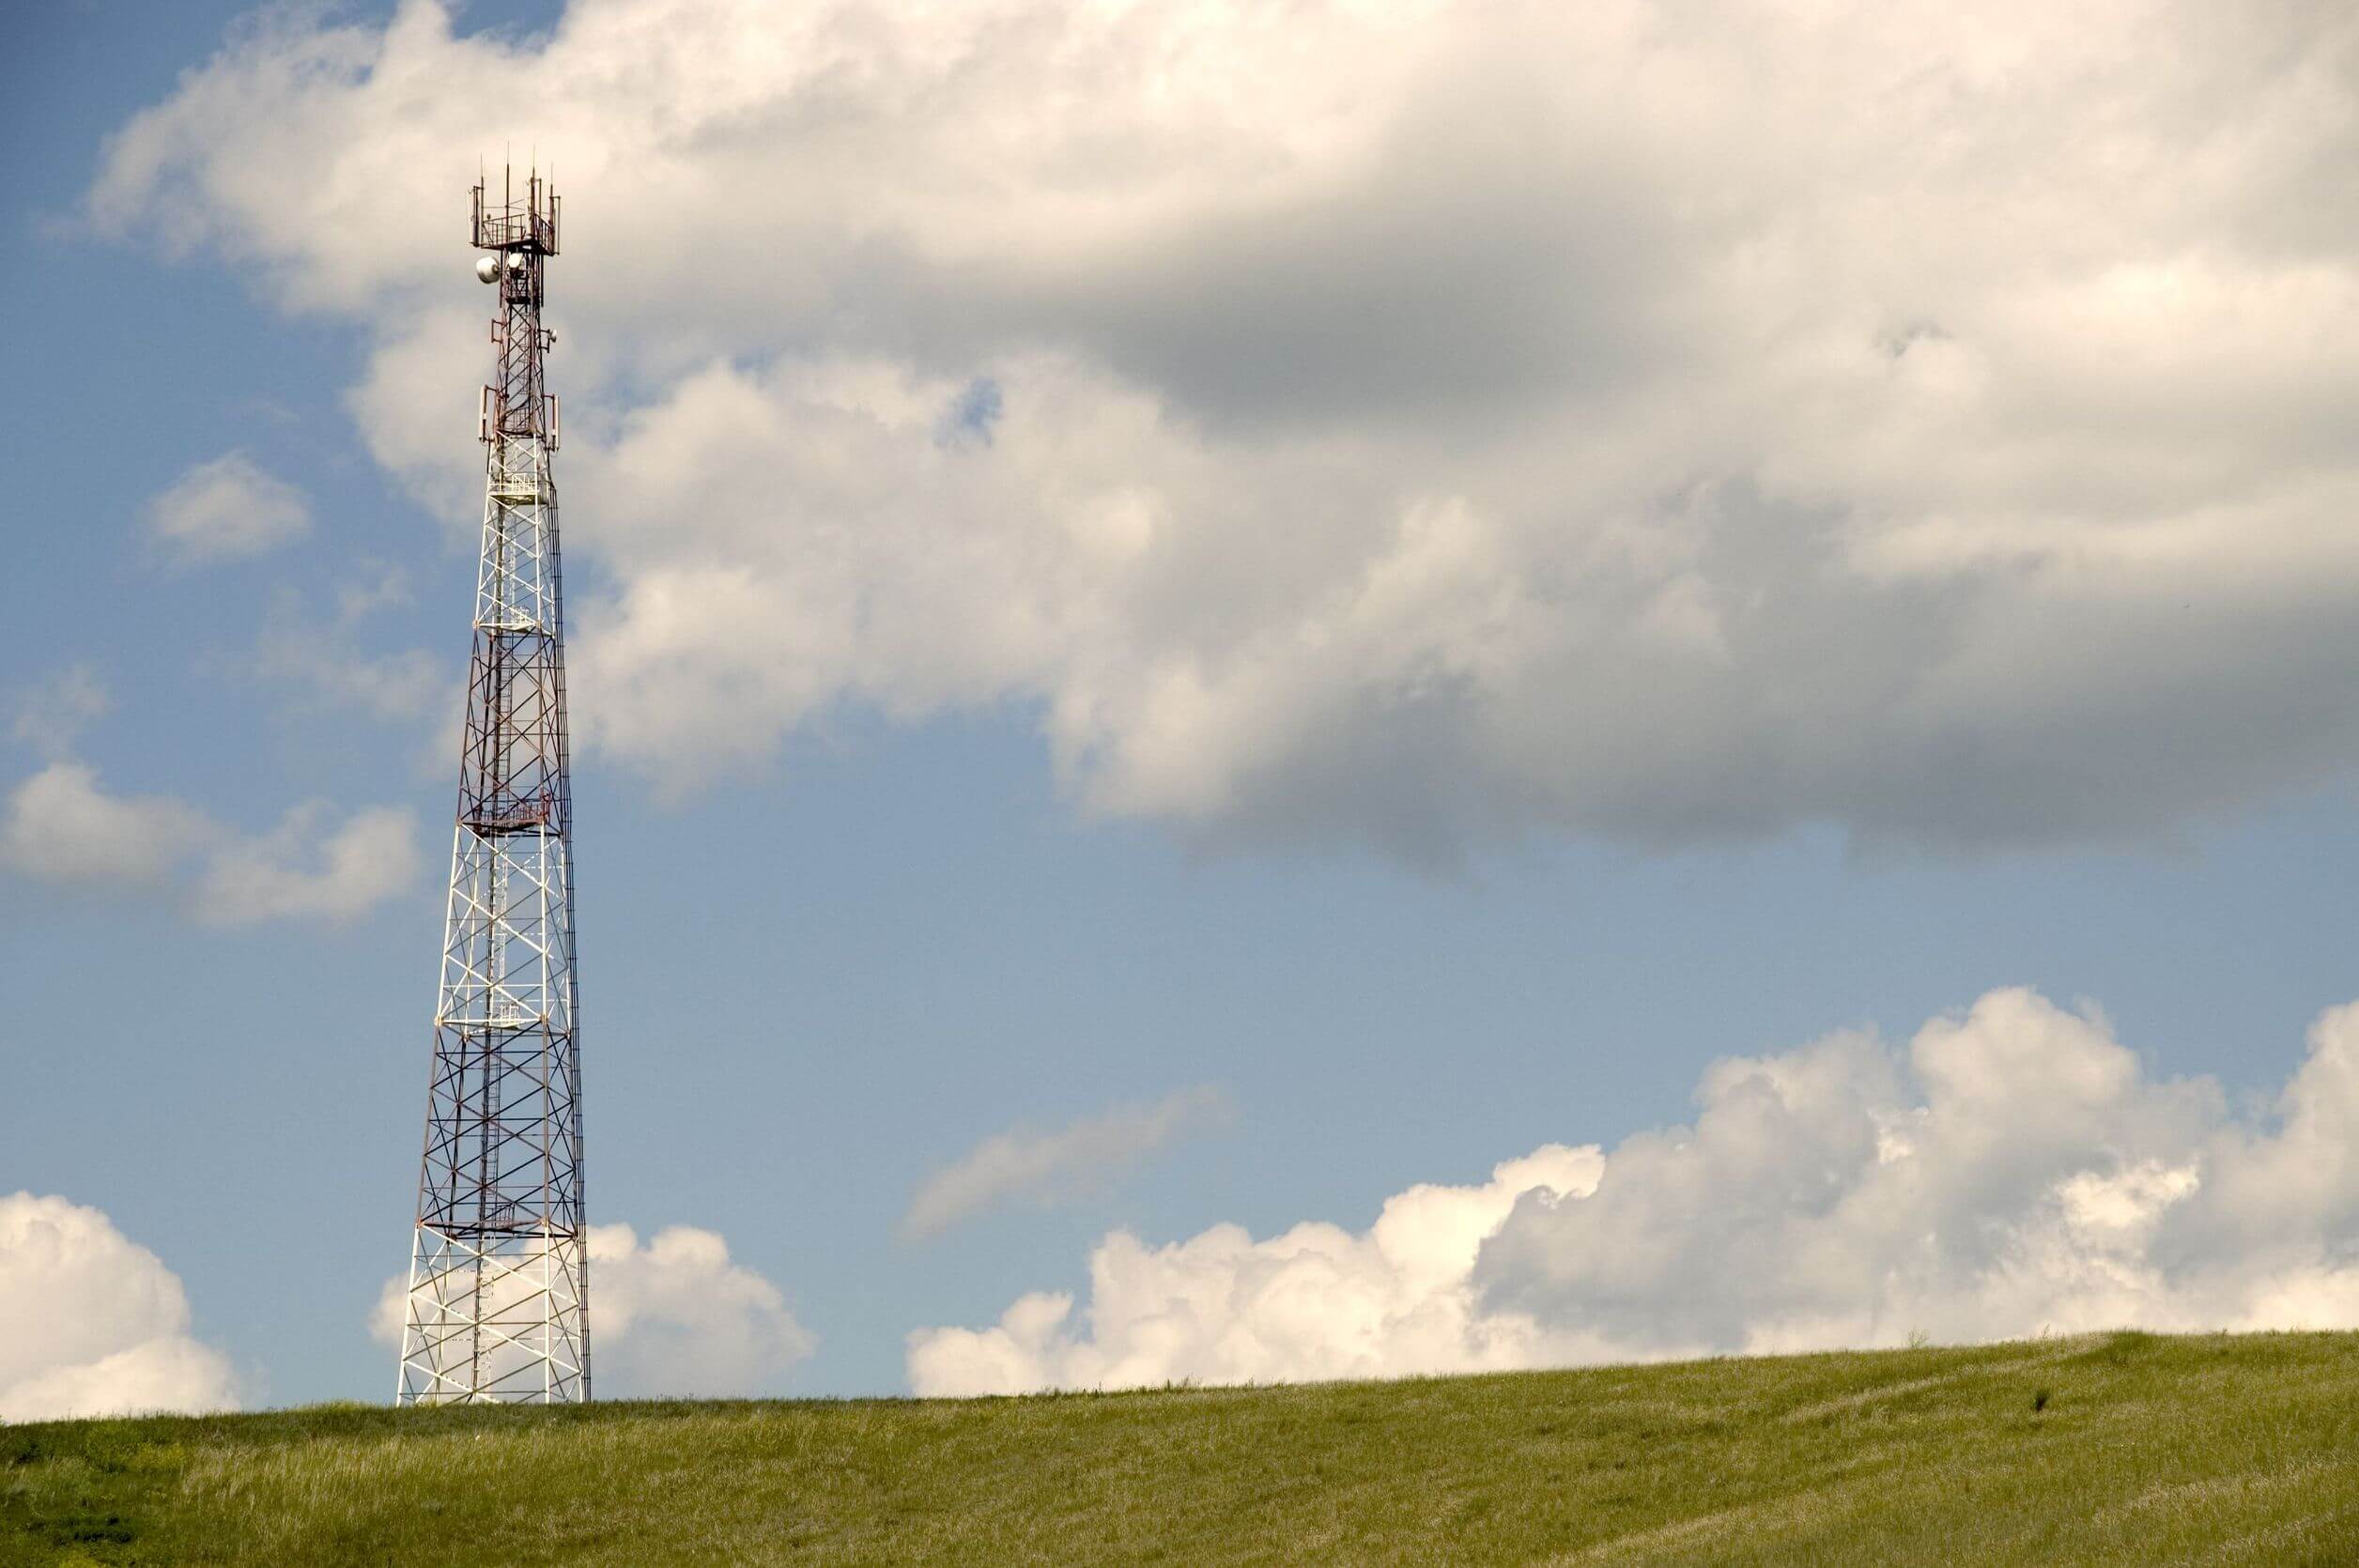 New Cell Tower Lease: What Is a Property Owner's Bargaining Power?